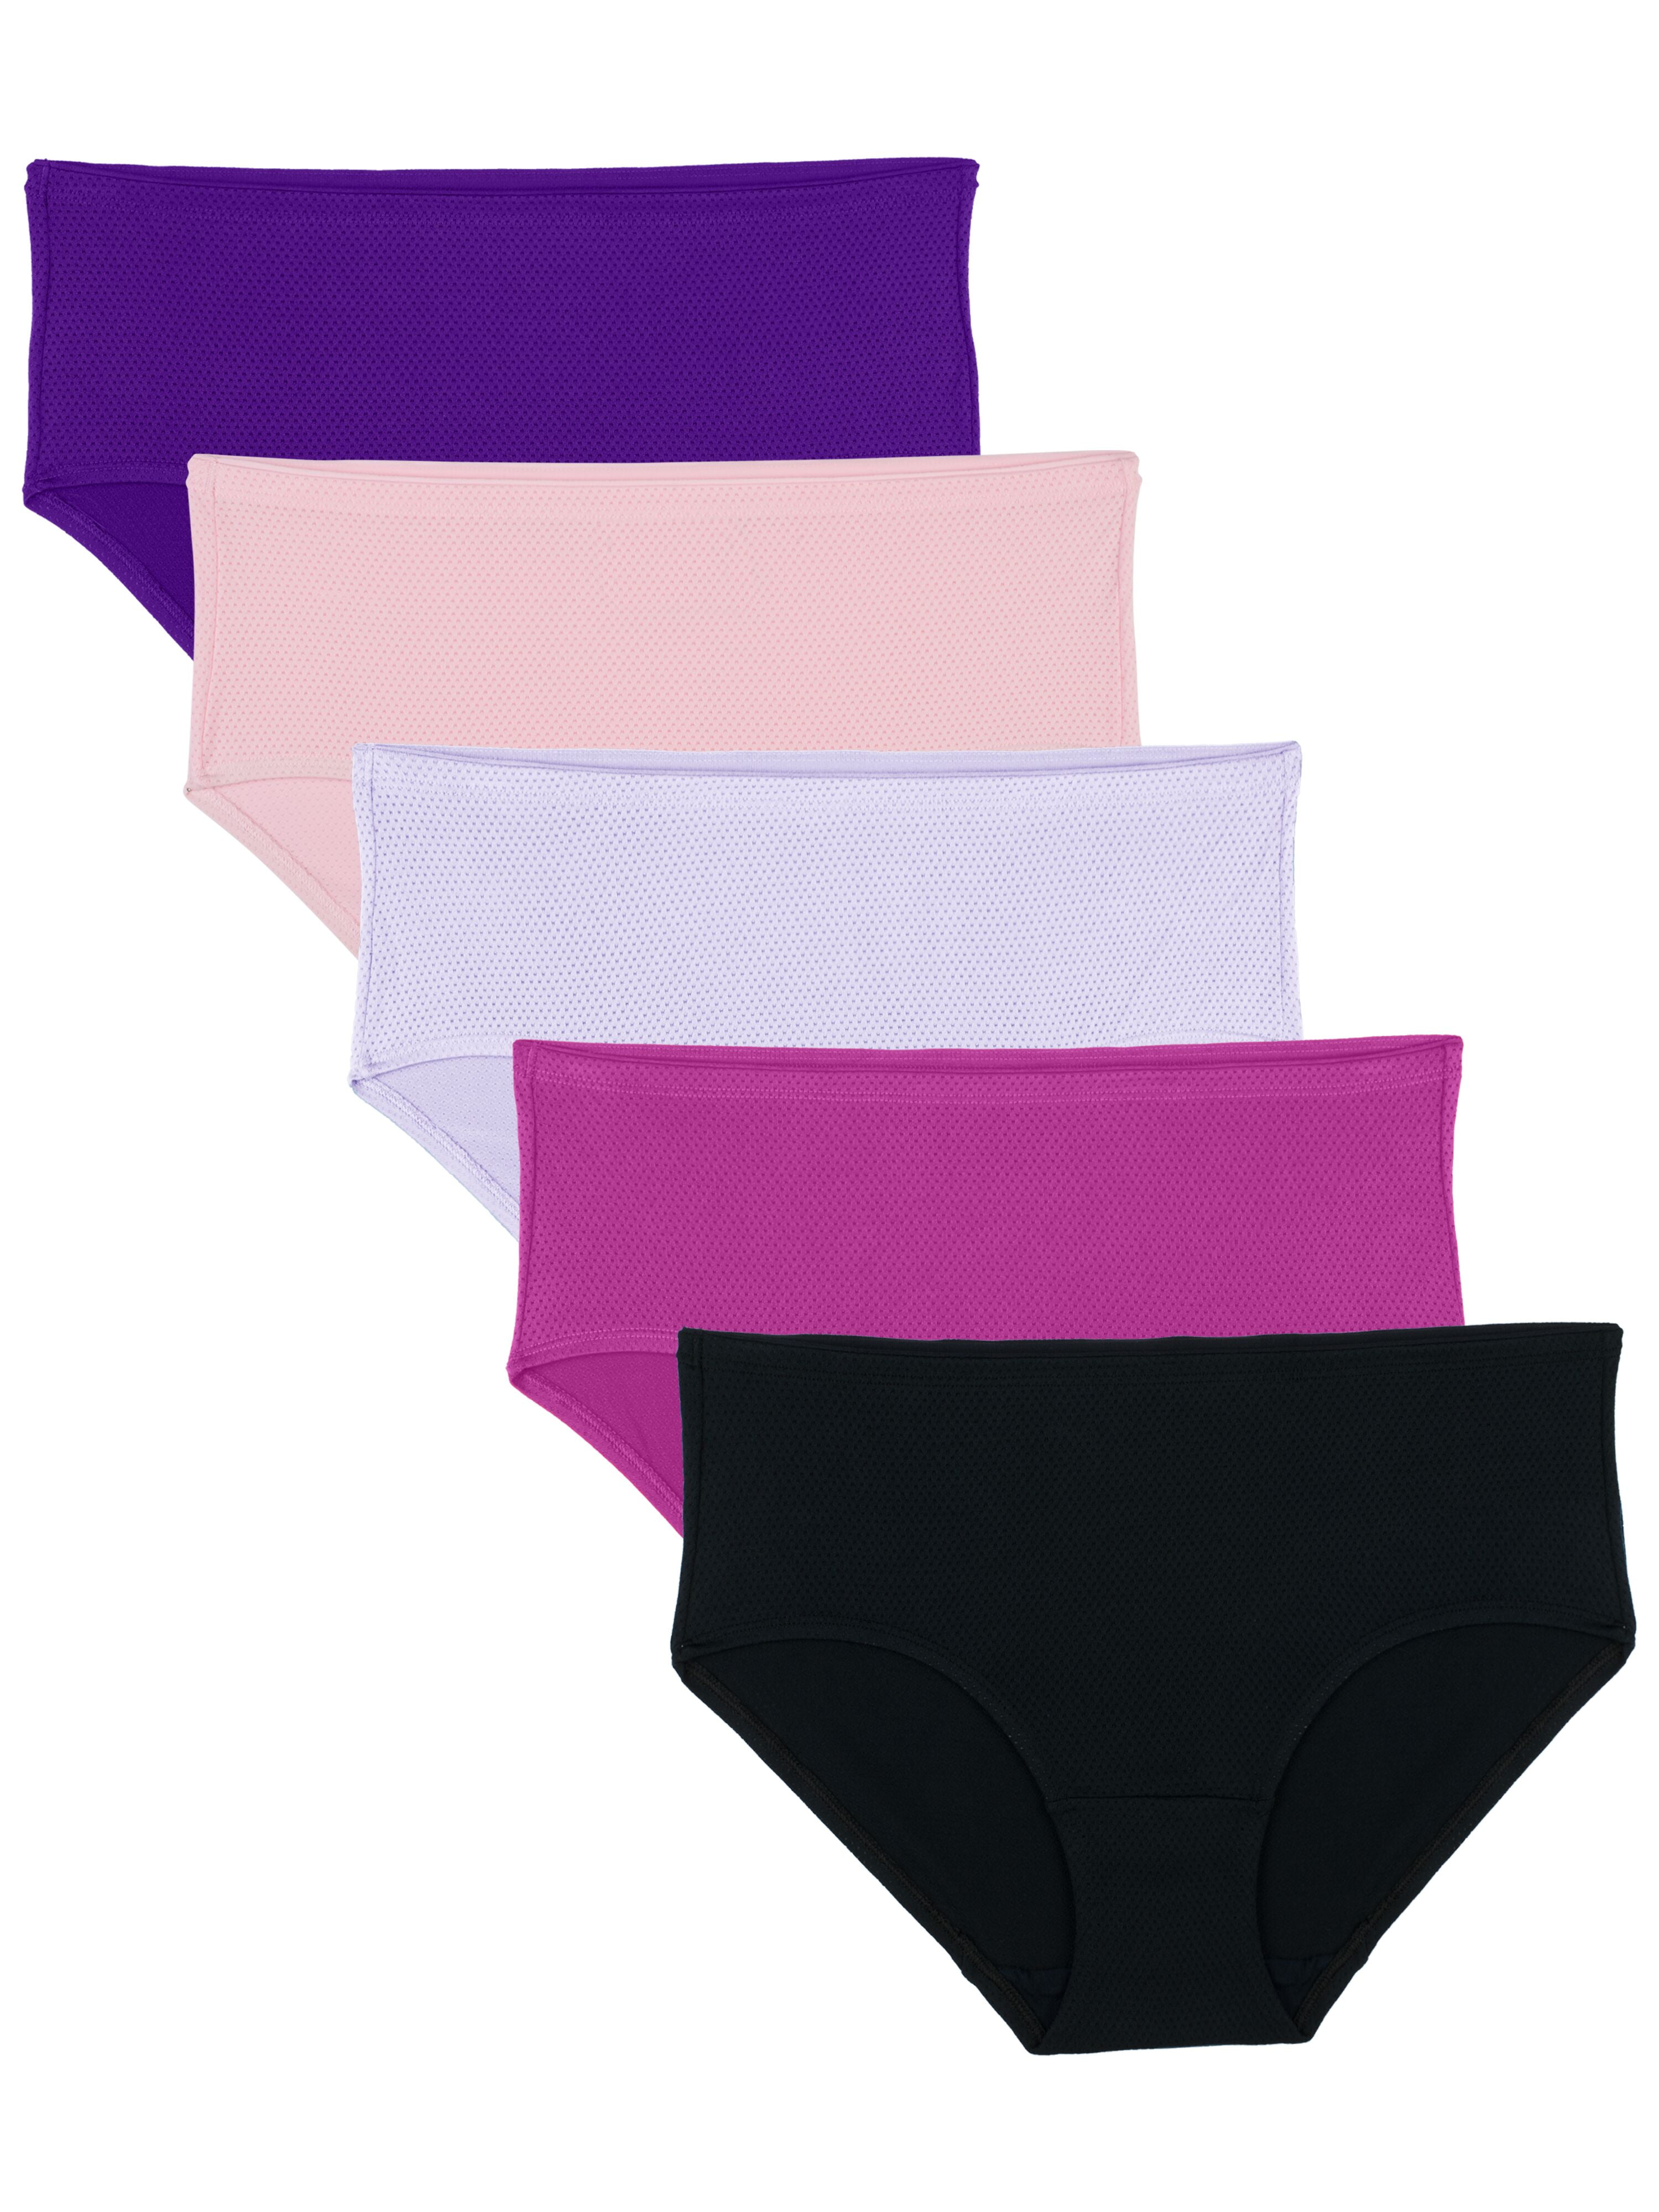 Fruit of the Loom Breathable 5 Pack High Cut Panty 5dpbbh1